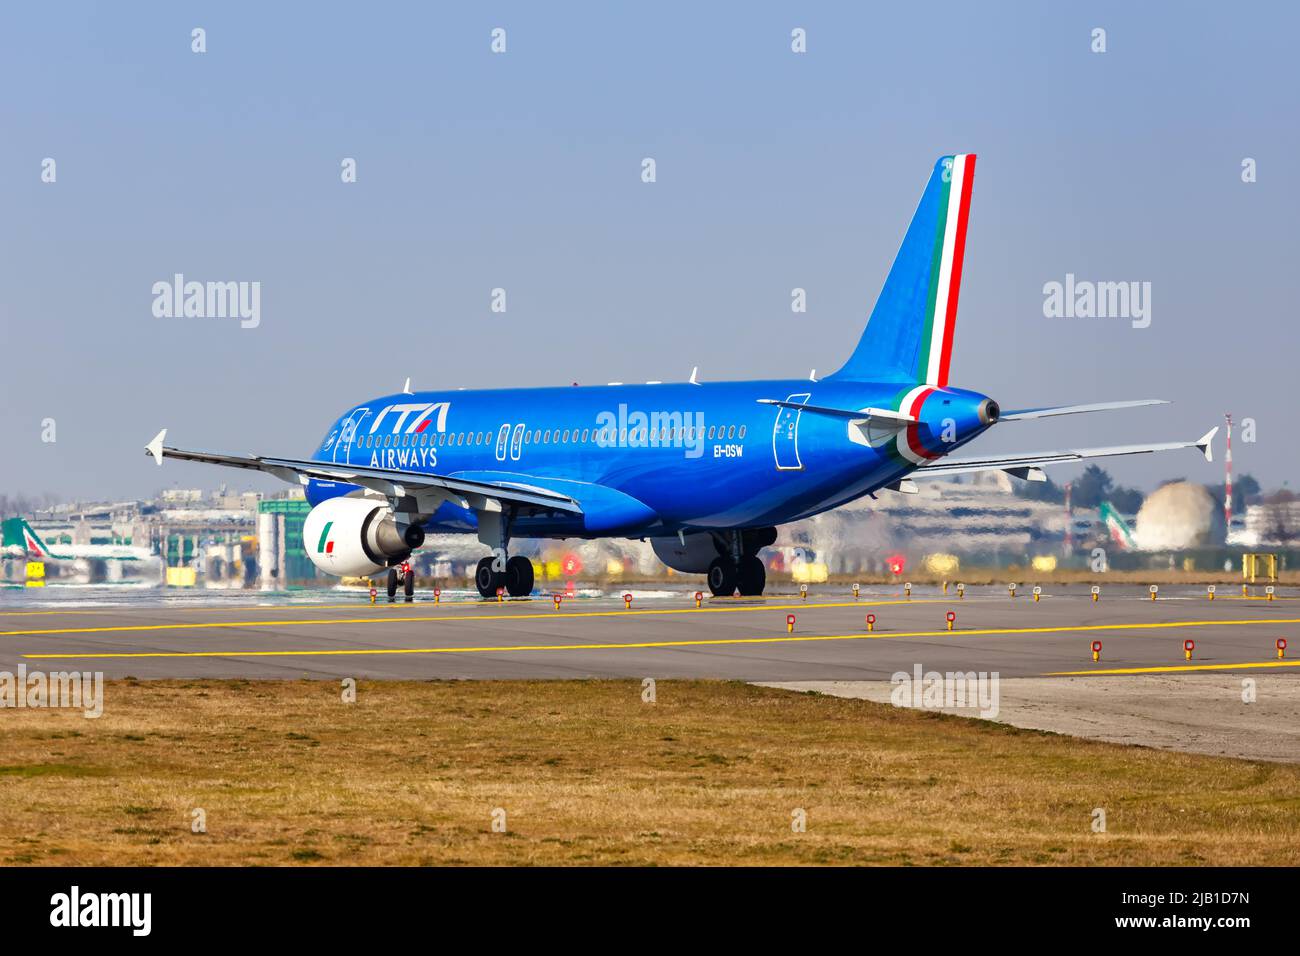 Milan, Italy - March 22, 2022: ITA Airways Airbus A320 airplane at Milan Linate airport (LIN) in Italy. Stock Photo